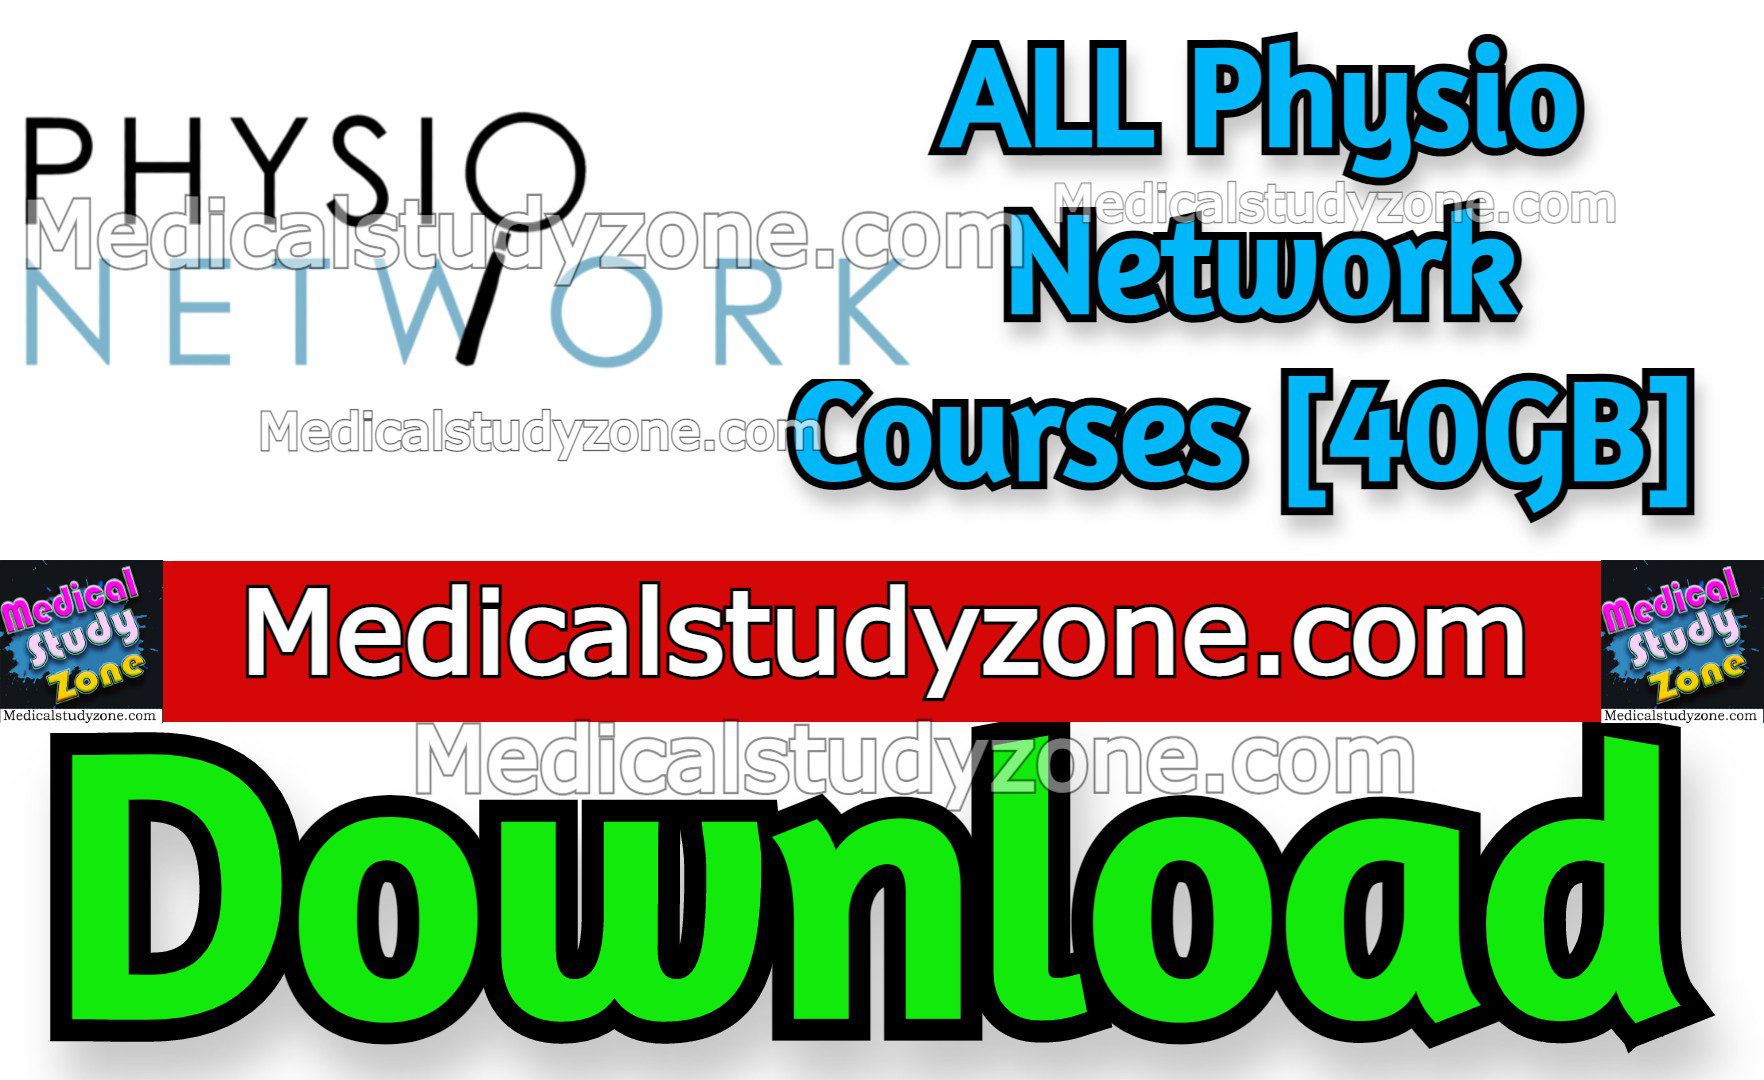 ALL Physio Network Courses 2023 Free Download [40GB]